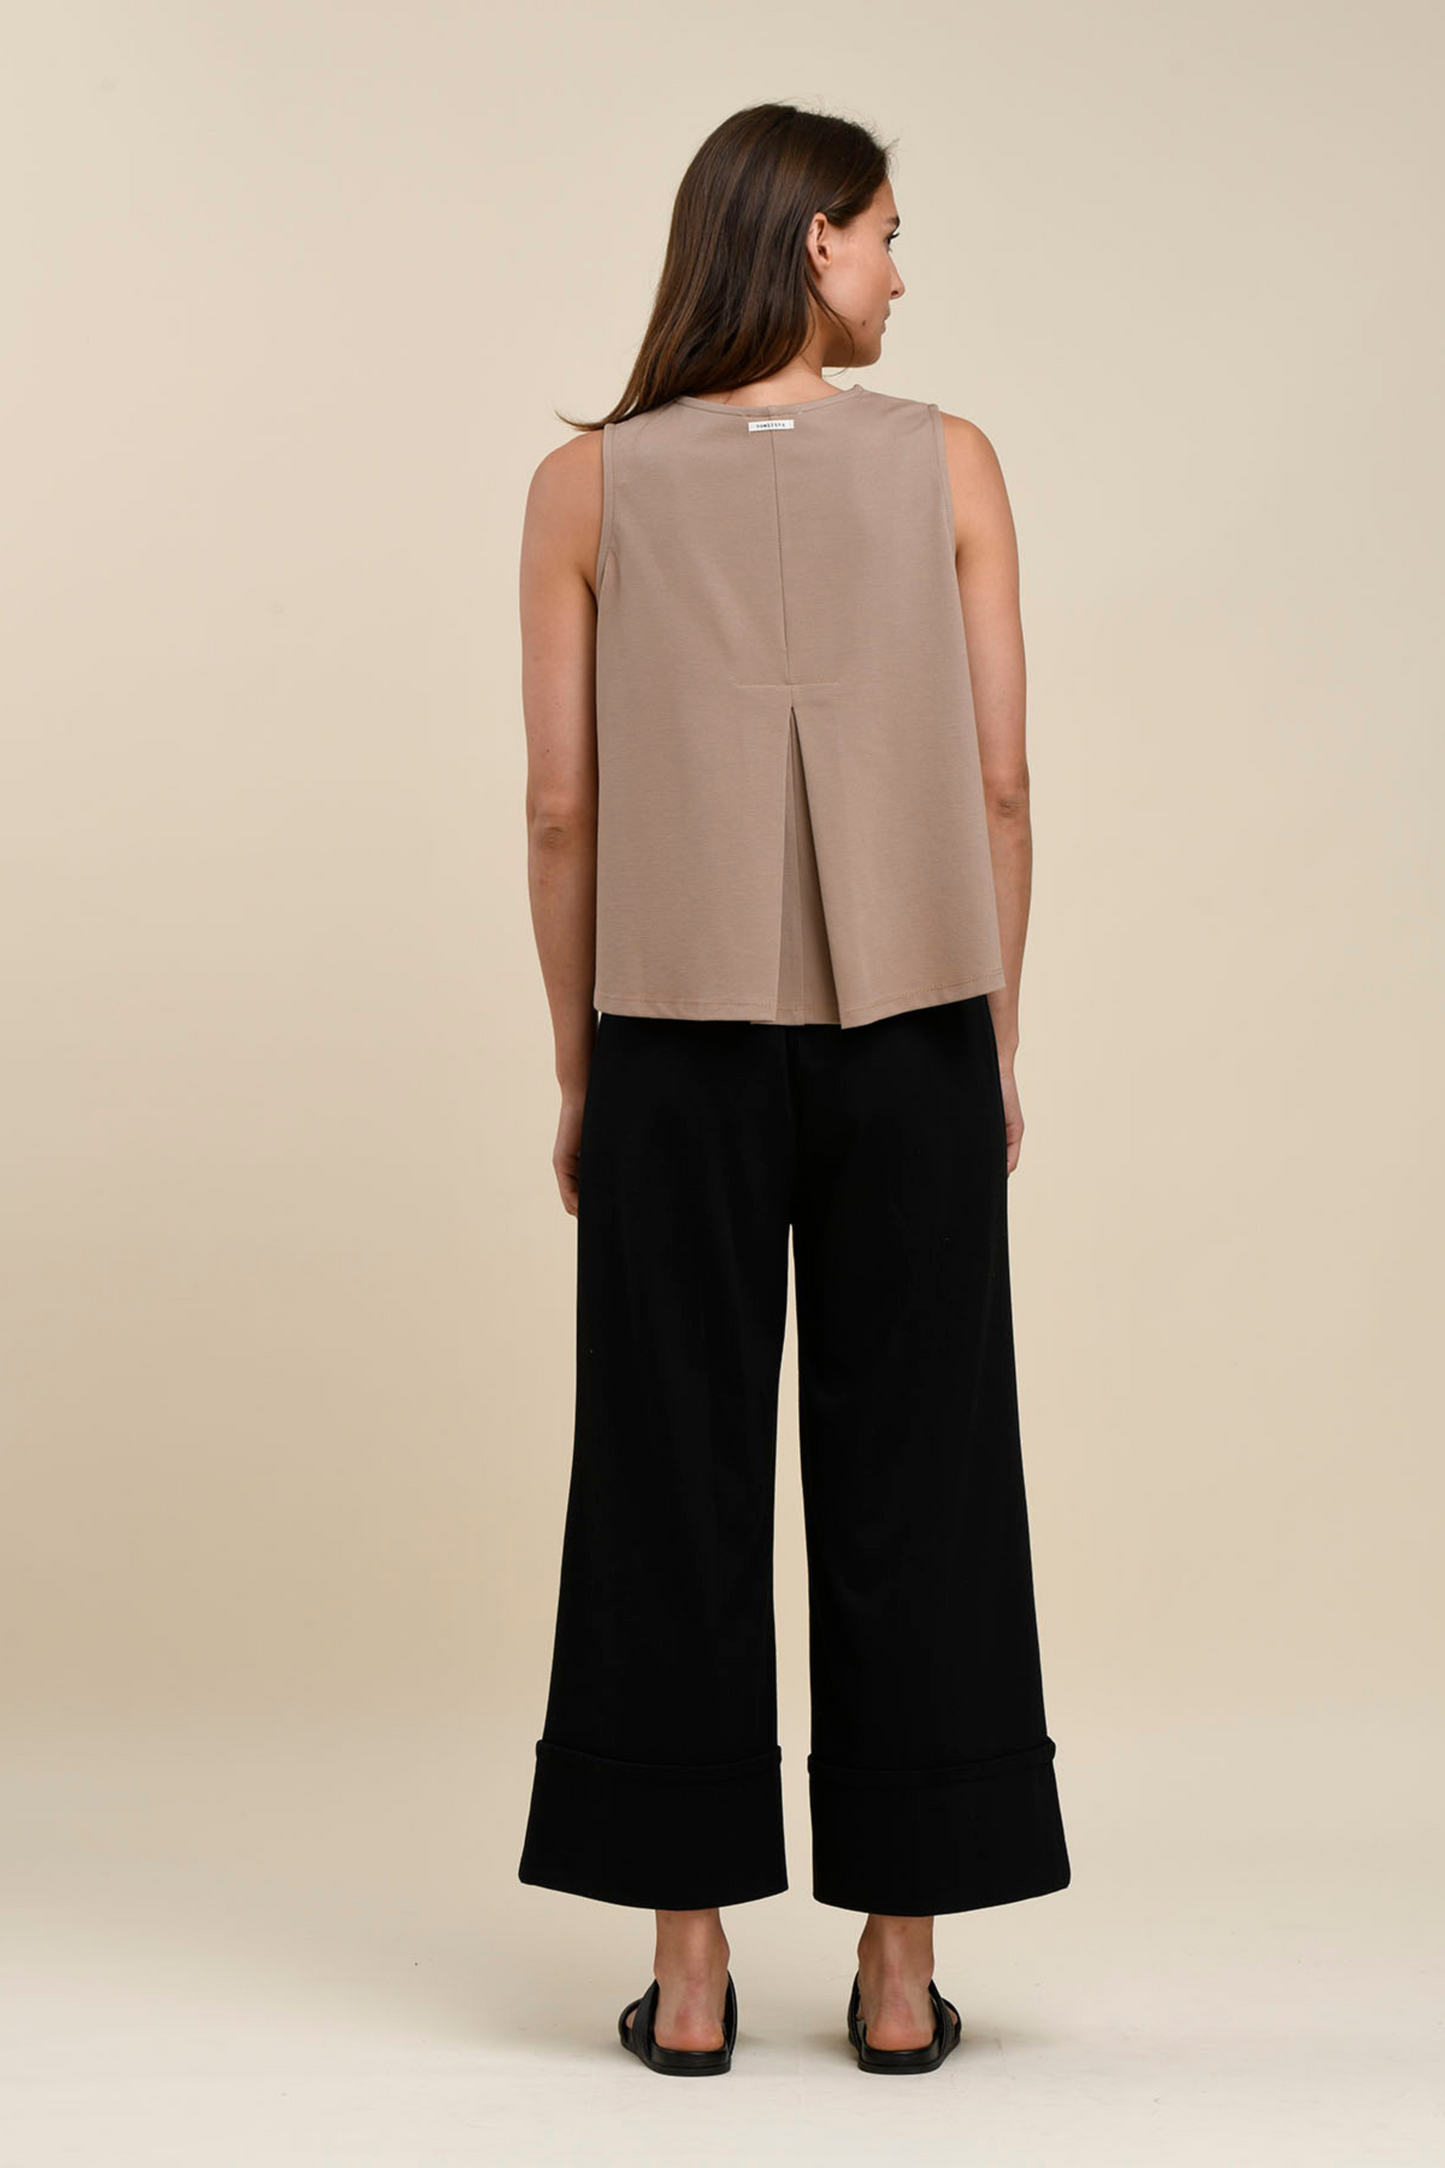 Humility - Biba Top In Taupe